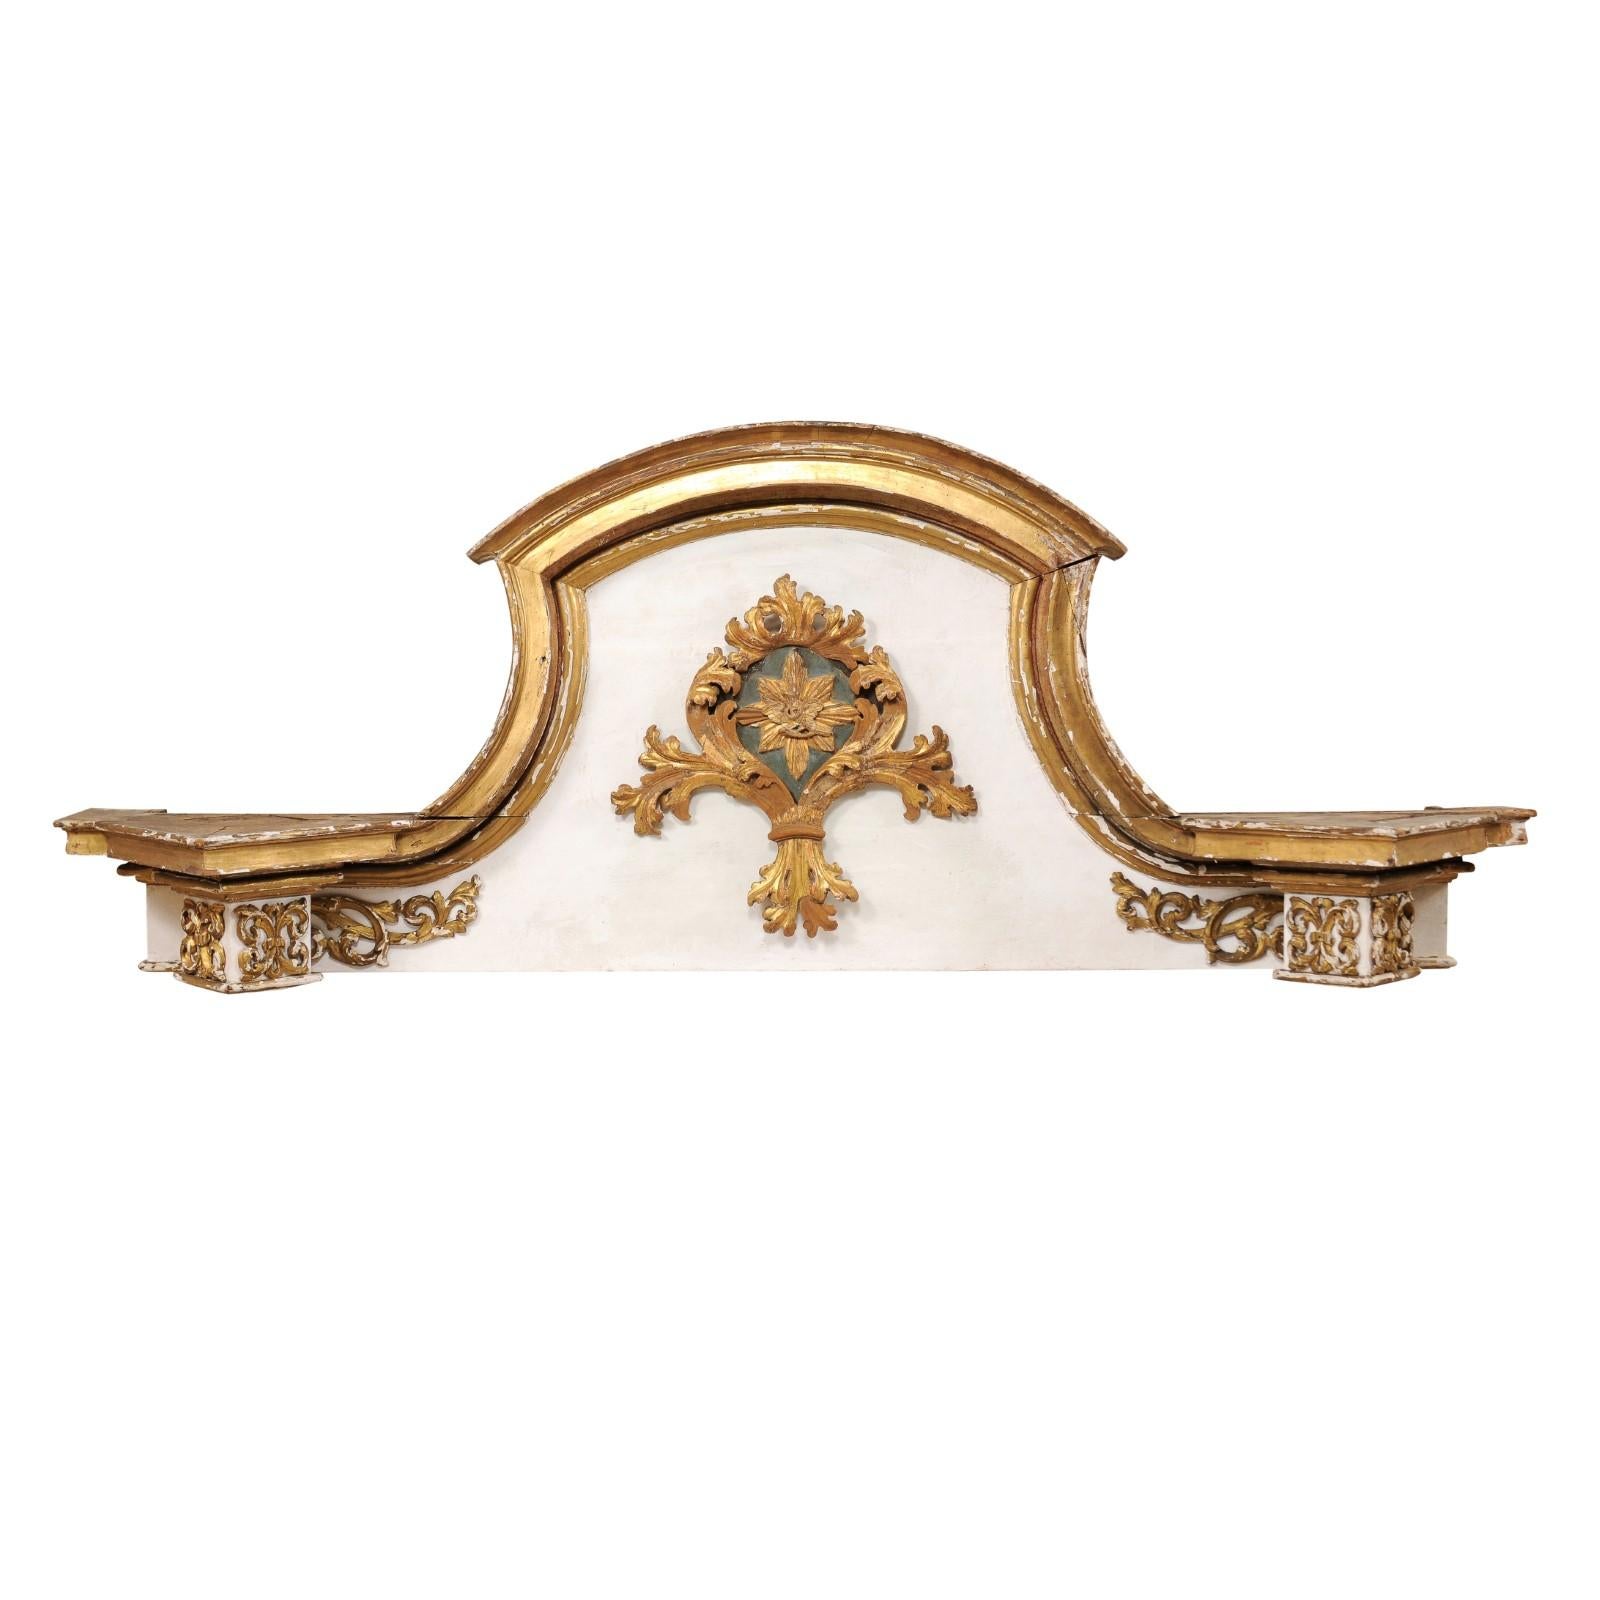 Impressive 18th Century Italian Carved, Gilded & Painted Wood Pediment Fragment For Sale